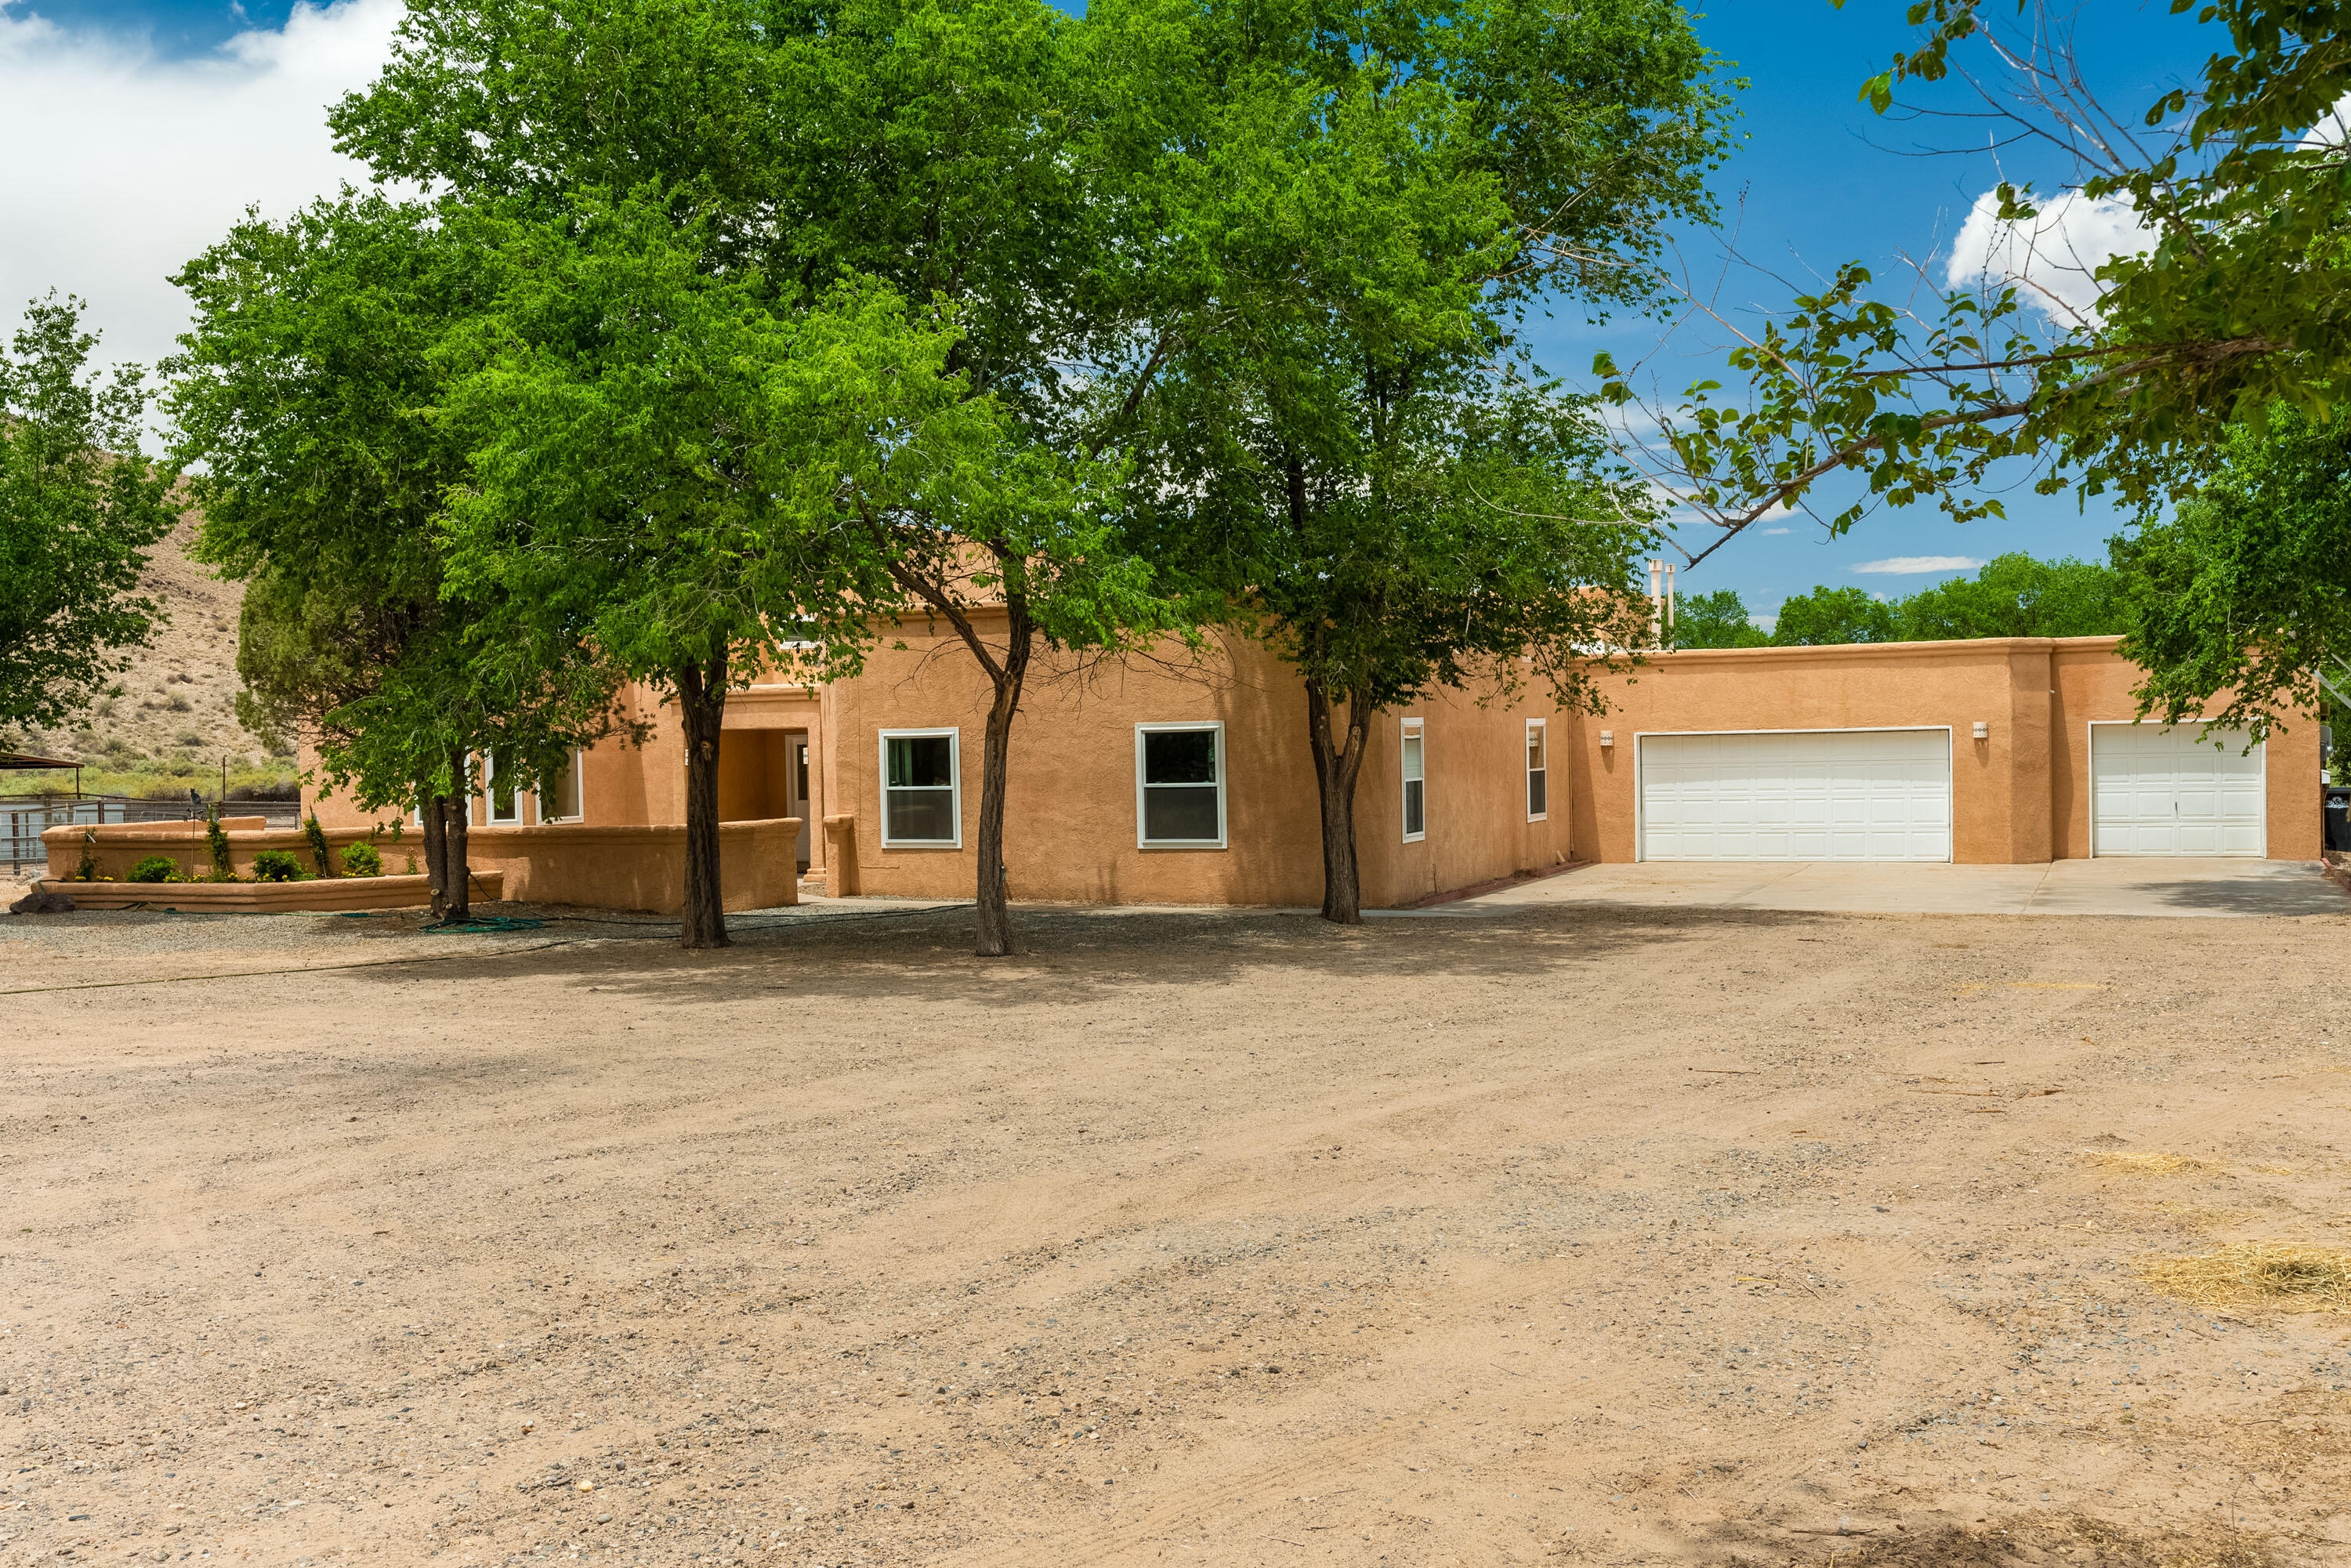 Bring all the animals & loved ones! Barn-36' x 36' with 4 12x12 stalls, hay and tack area, plus pasture w/cover , chicken coup and room to have other animals as well. Home owners have done many upgrades since purchase in 2020-including replacing the windows, water heater, furnace and AC, toilets, fixtures, some lighting, most appliances. Lovely courtyard entrance into this beautiful light-filled home with  raised ceilings.  Open floorplan, gorgeous clerestory and picture windows. Updated kitchen wi/ SS appliances, marble counters, and bar seating. Stunning owner's suite-sitting area, walk-in closet and access to back patio. Spa-like bathroom-free standing soaking tub, modern granite tiled separate shower & granite-topped vanity. Wood stove w/ blower for cozy nights. TPO roof in 2020.